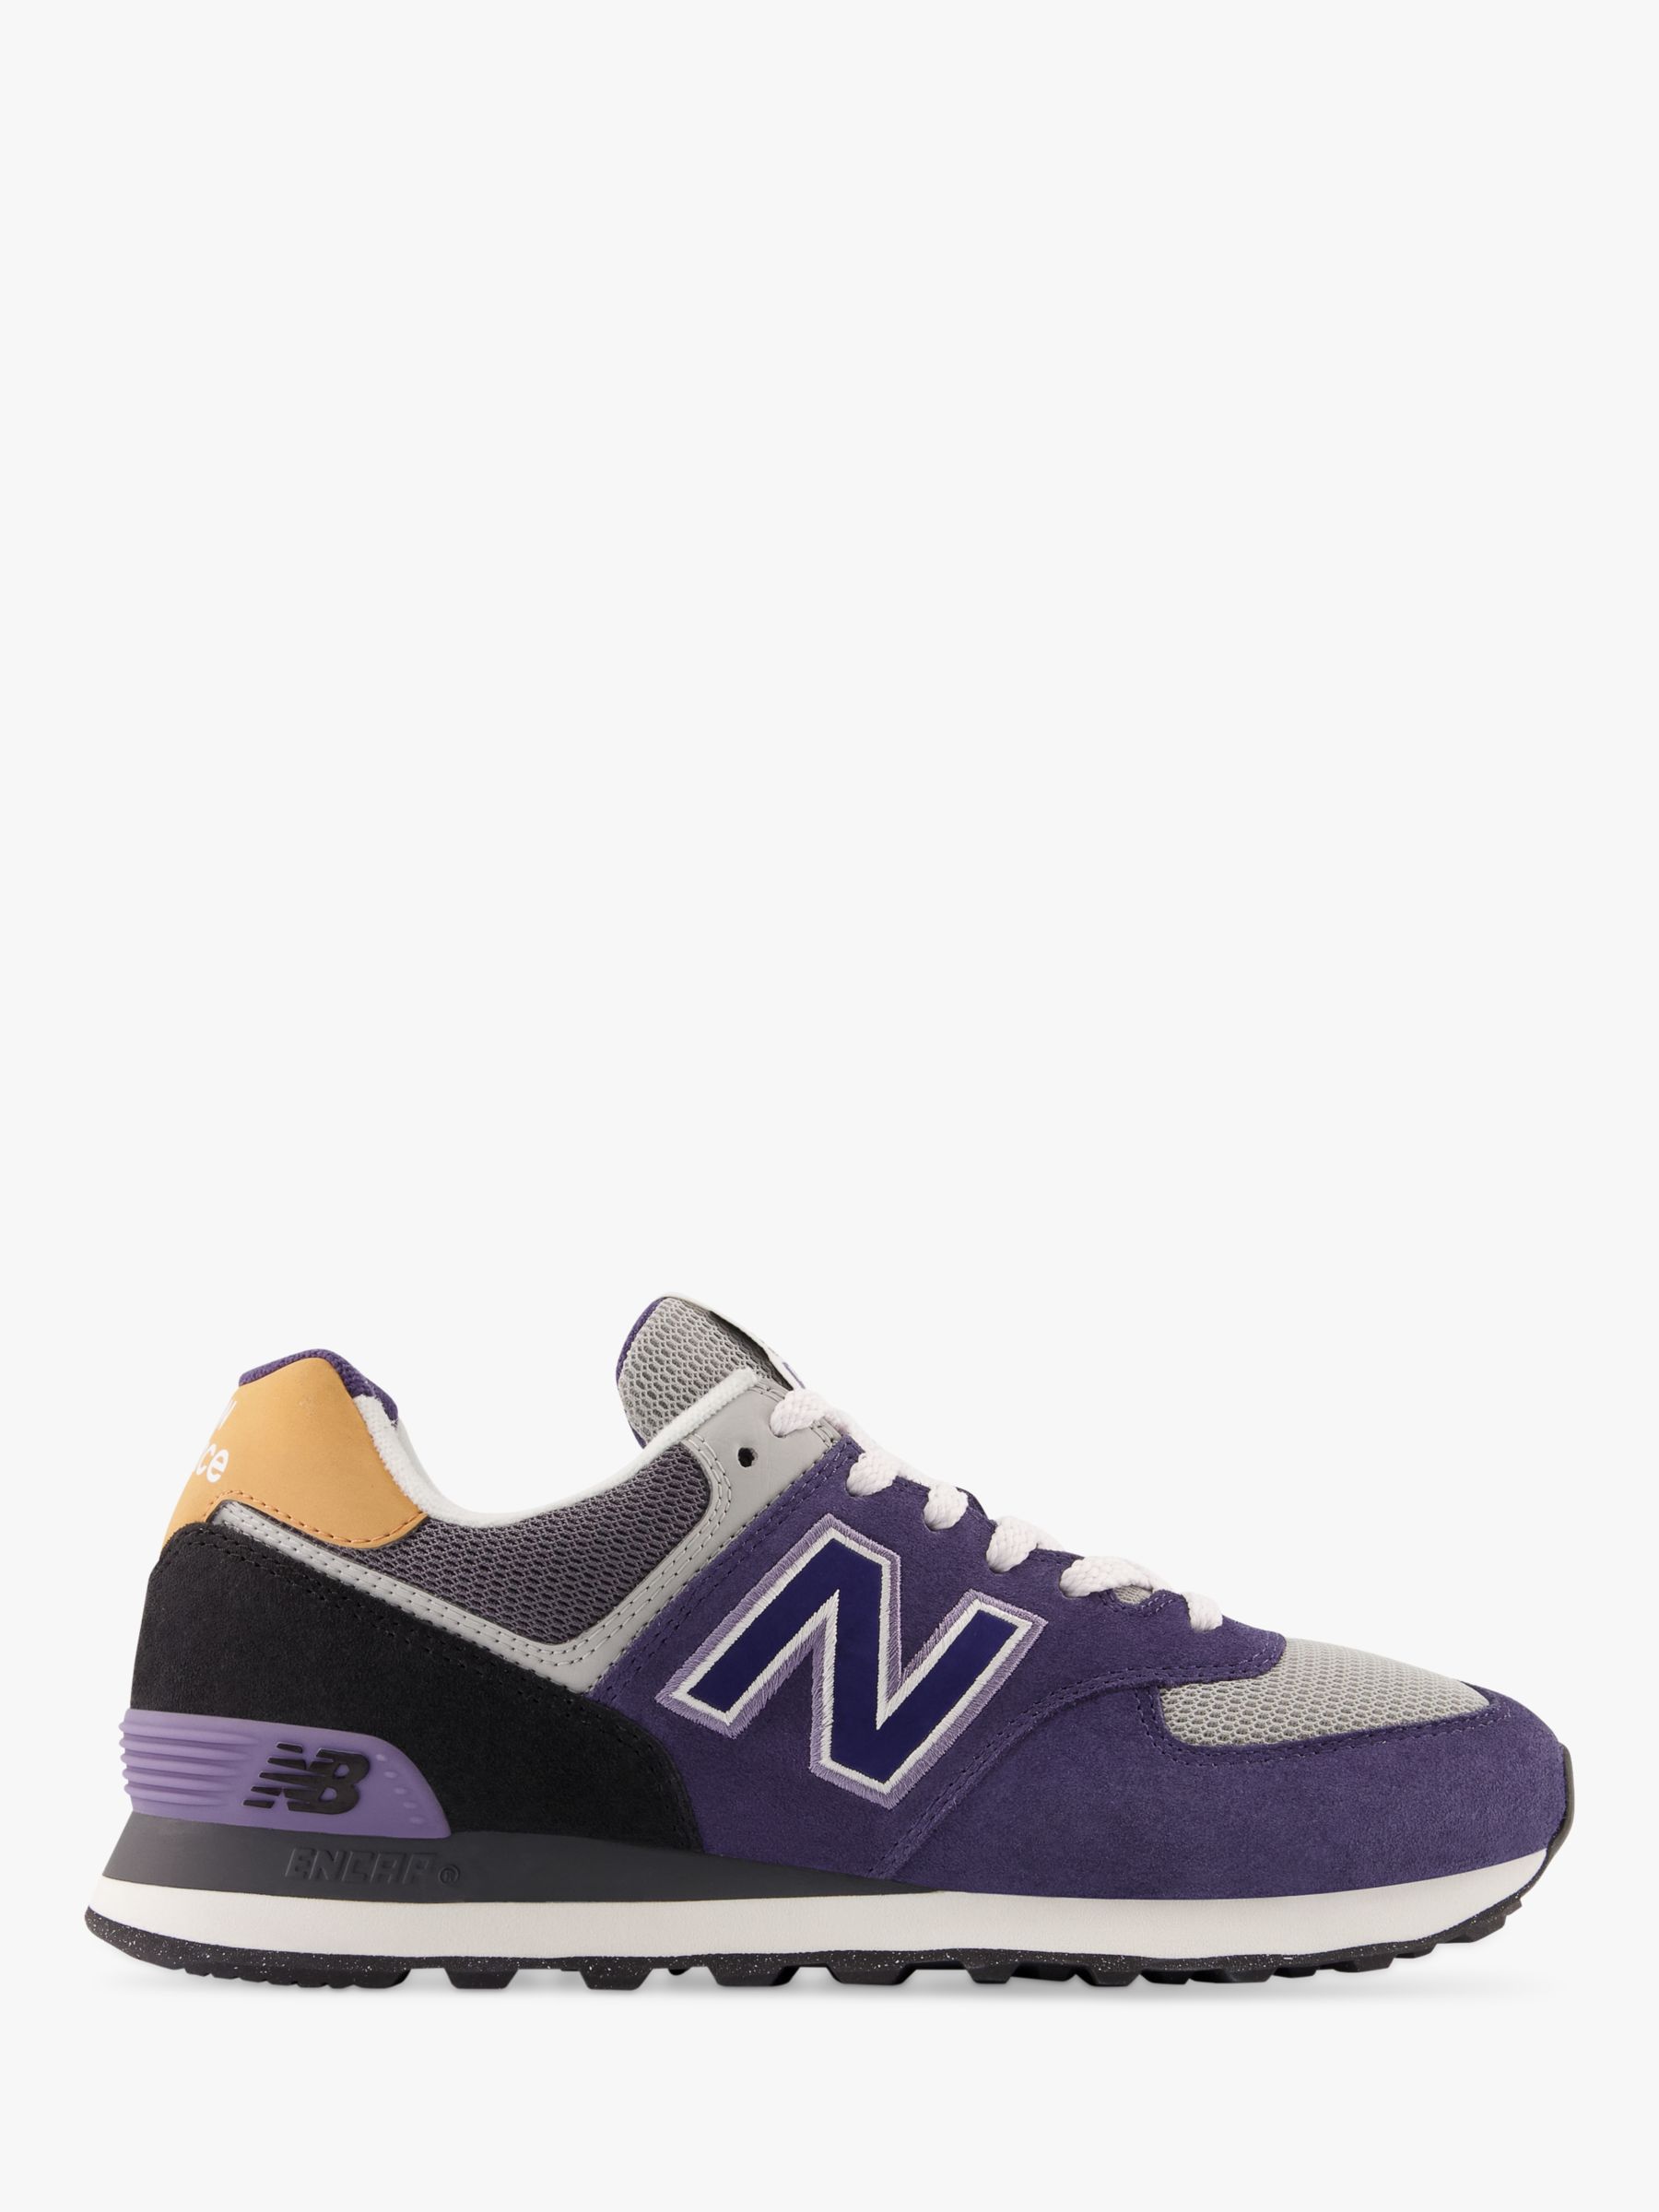 New Balance 574 Two Tone Men's Trainers, Purple at John Lewis & Partners